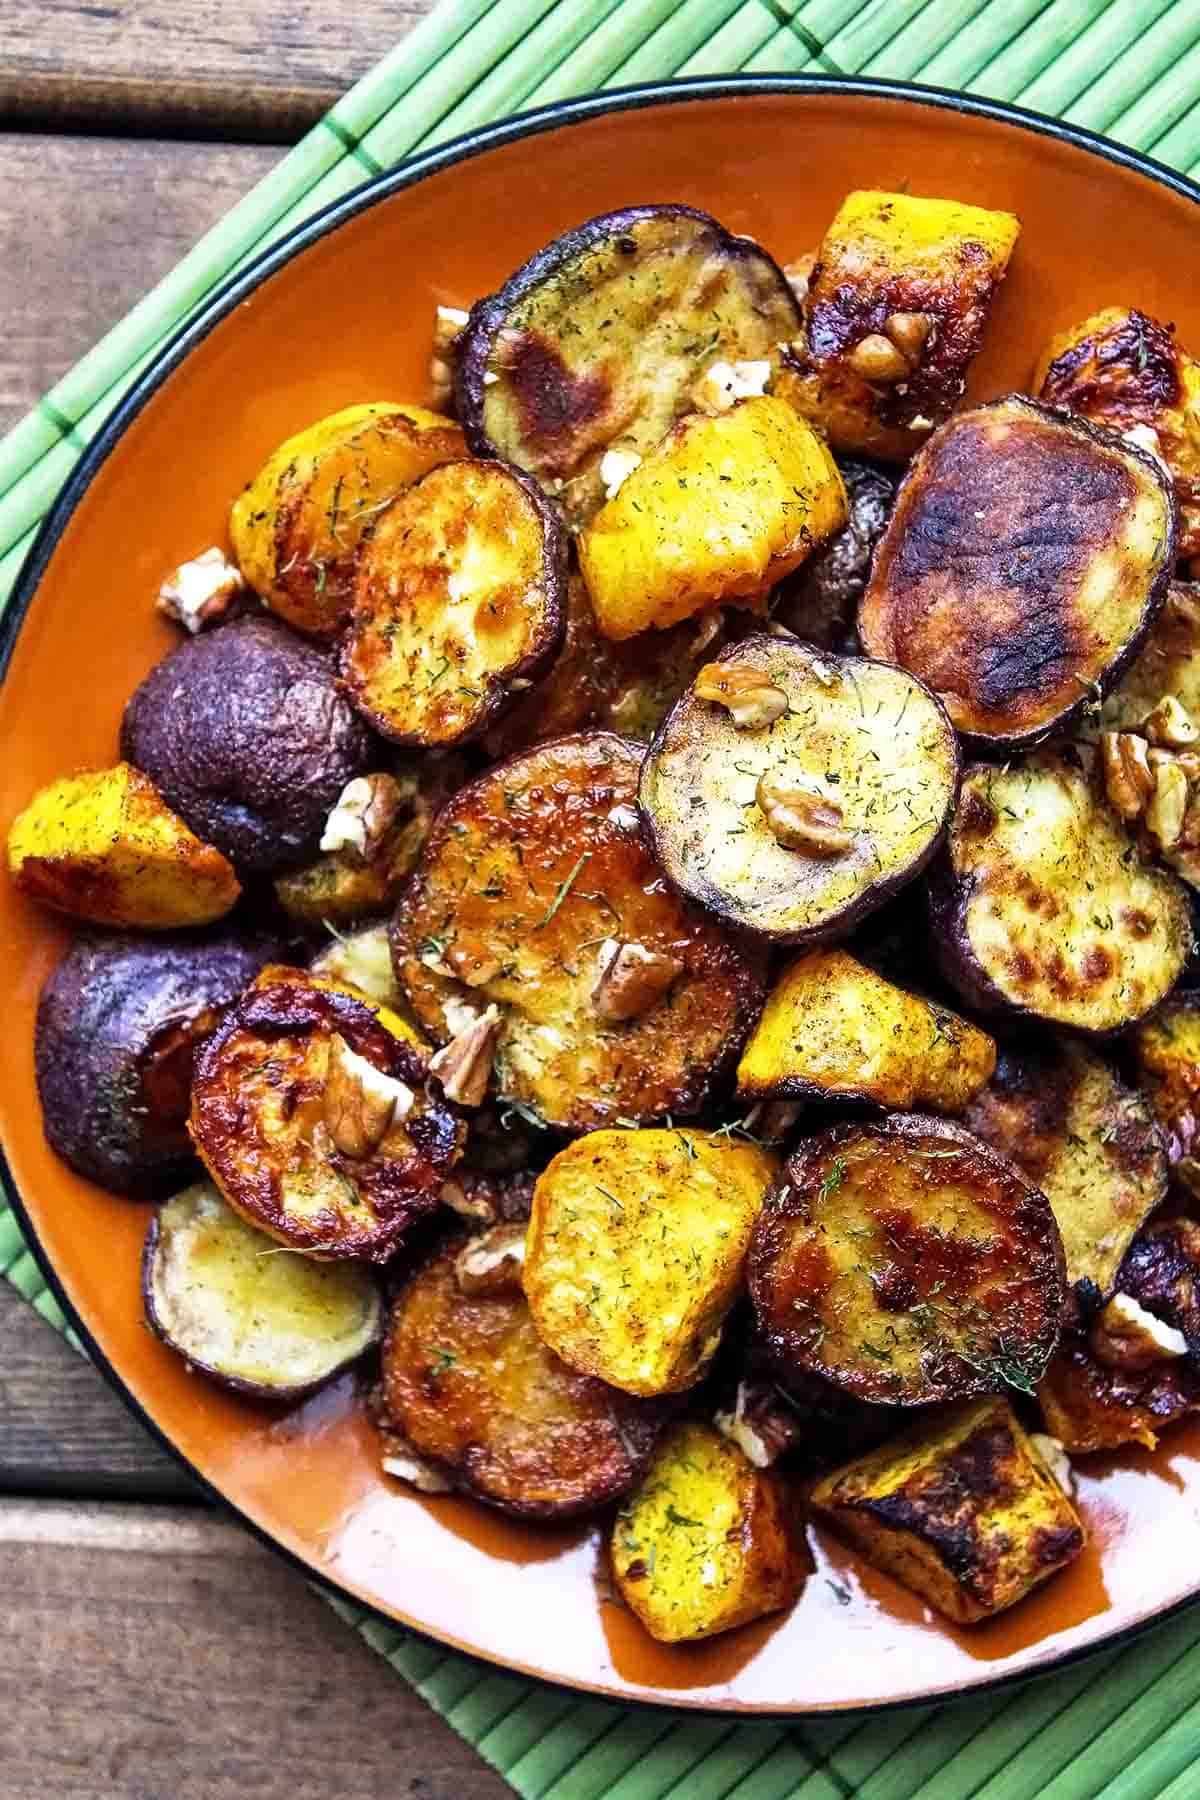 orange plate on green placemat with roasted potatoes and squash cubes